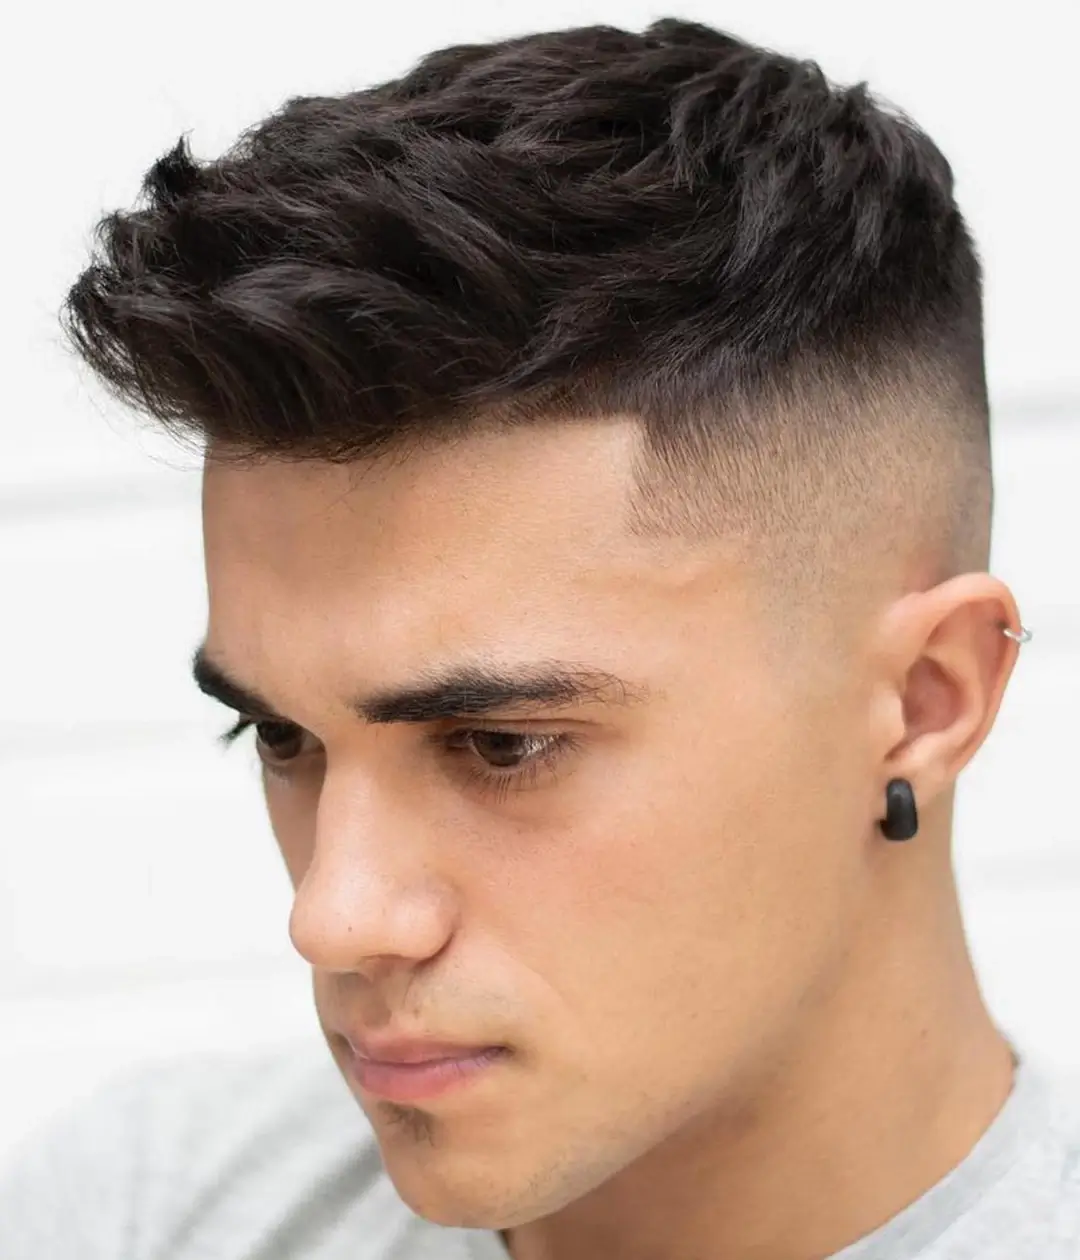 mens-fade-haircut-with-textured-top